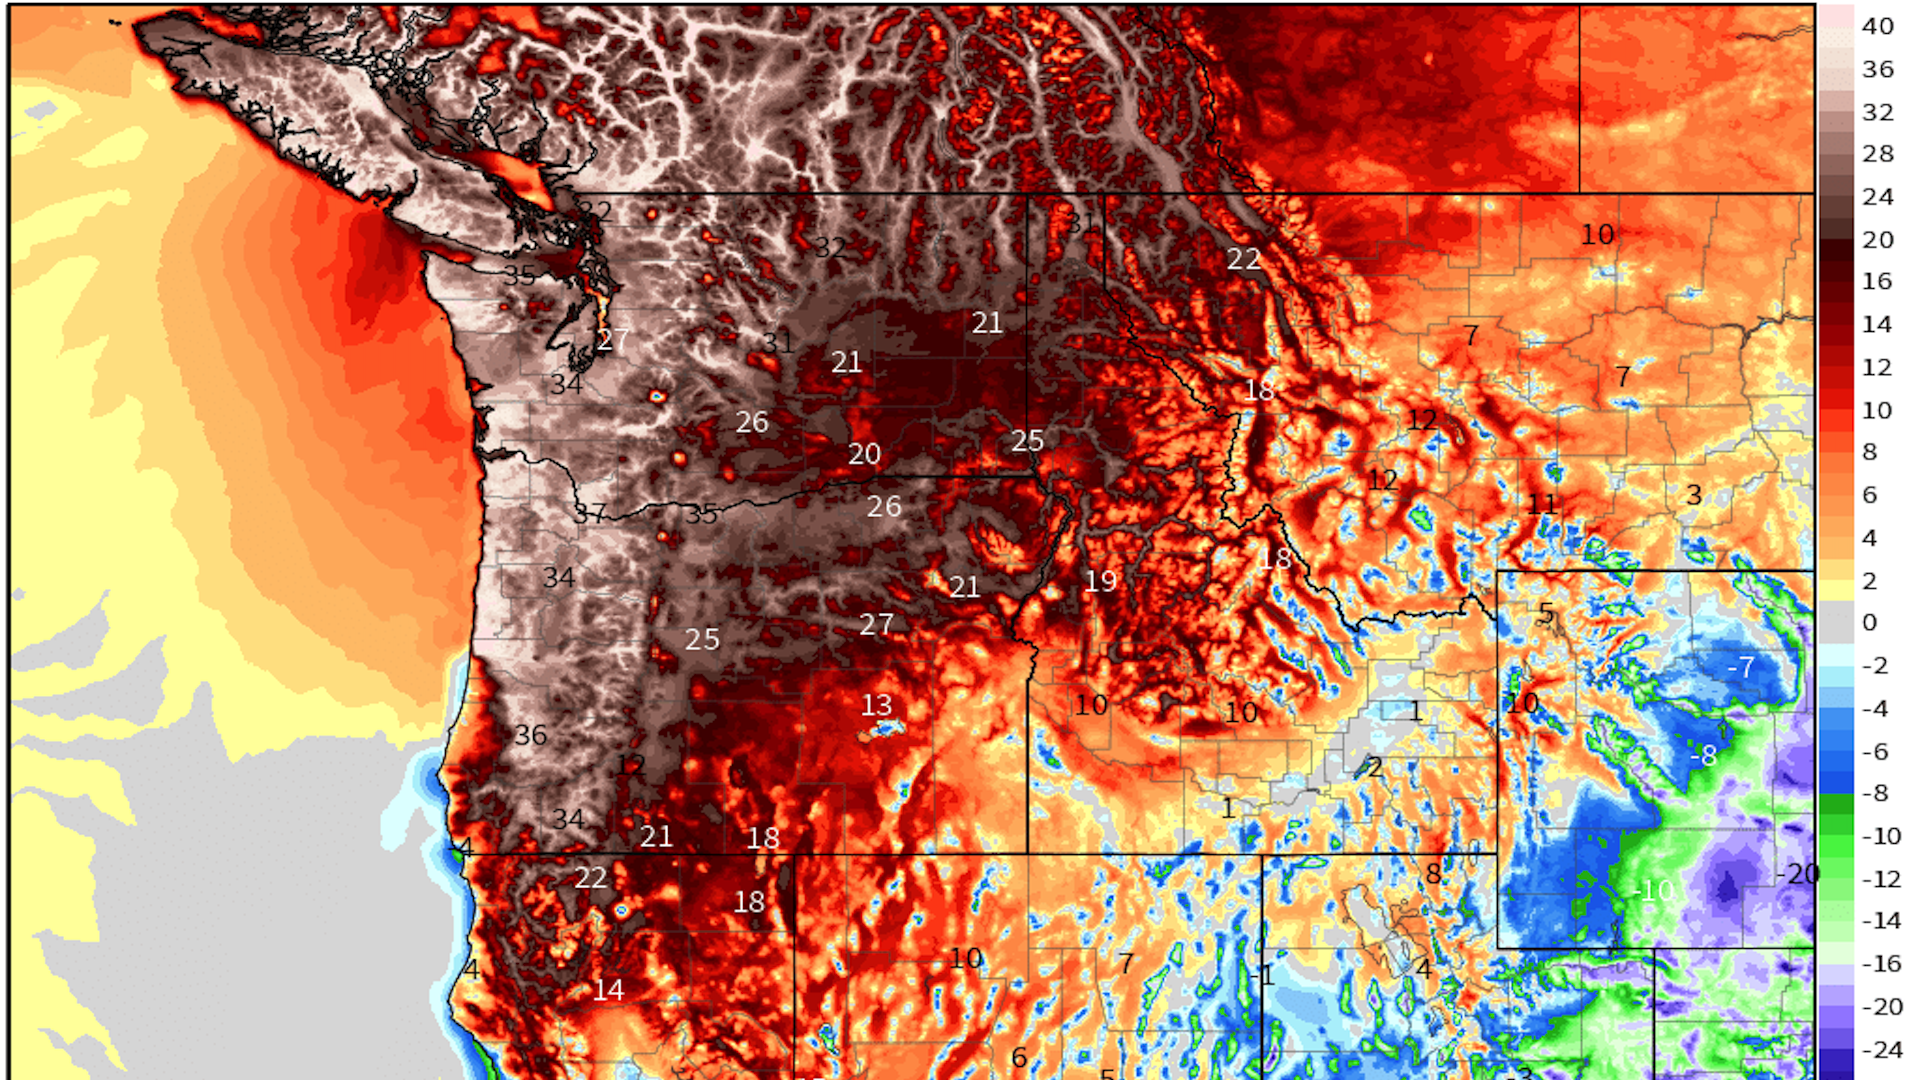 Map showing red colors indicating much hotter than normal conditions across the Pacific Northwest on June 27, 2021.